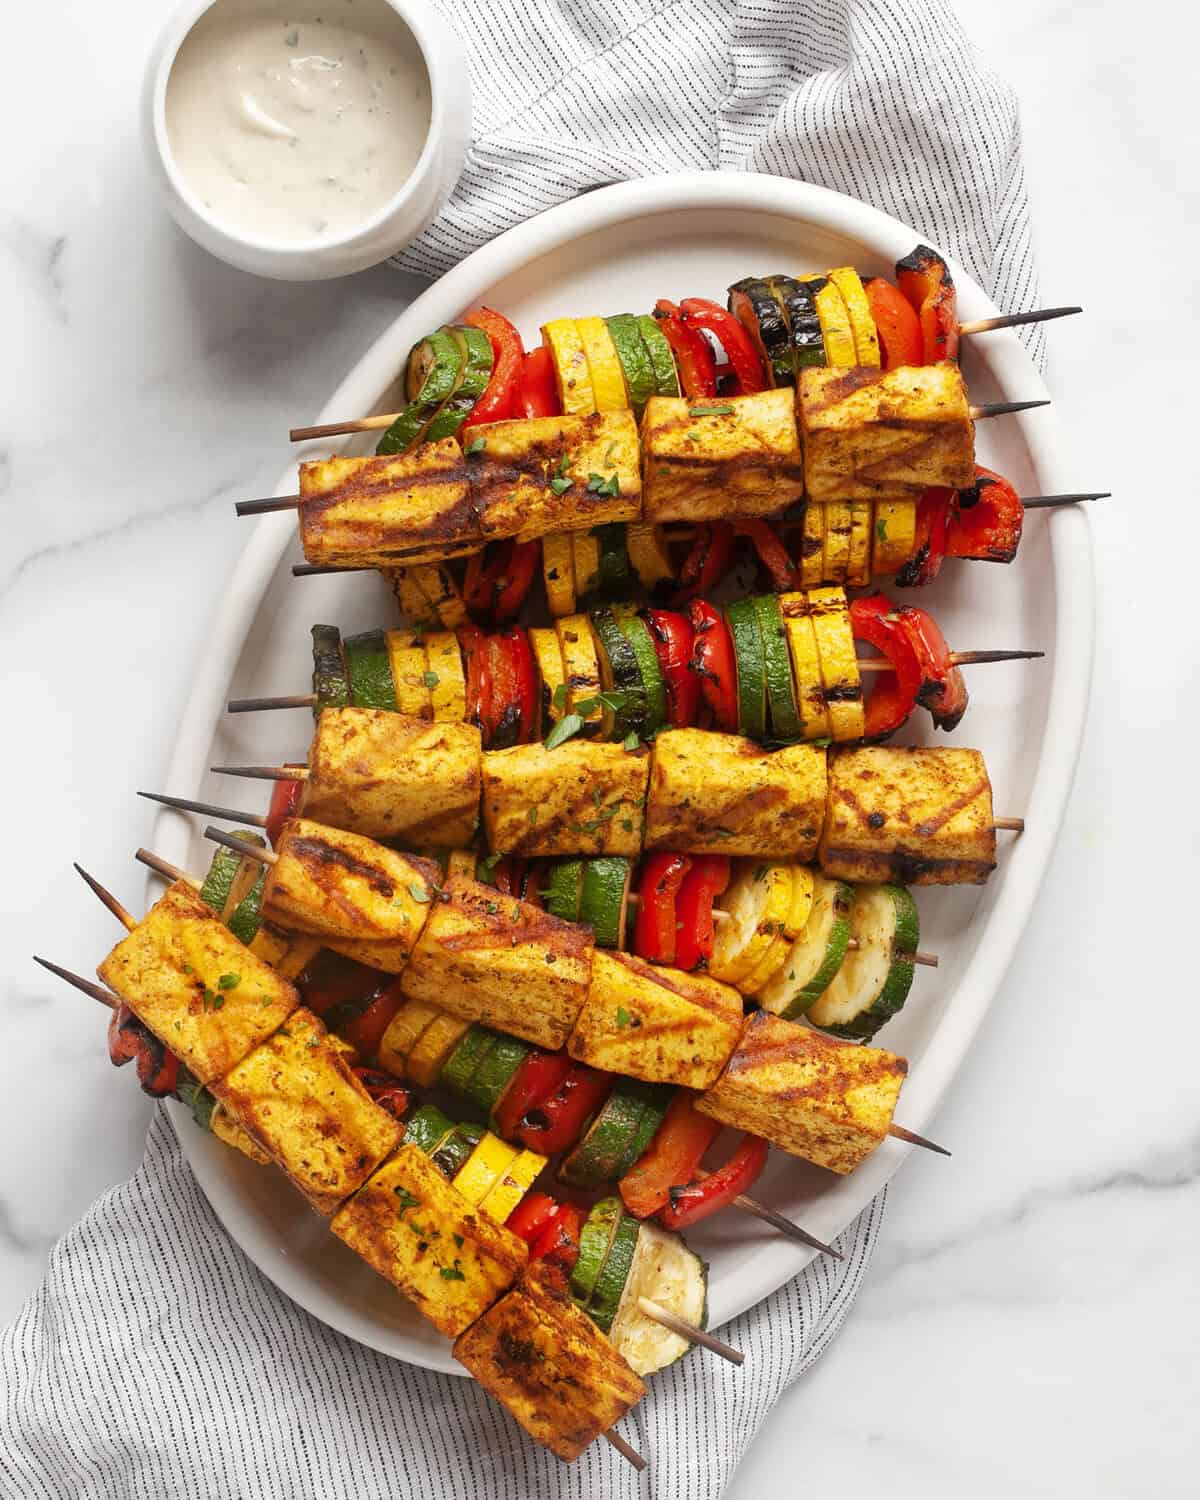 Grilled tofu and vegetable skewers on a serving platter.